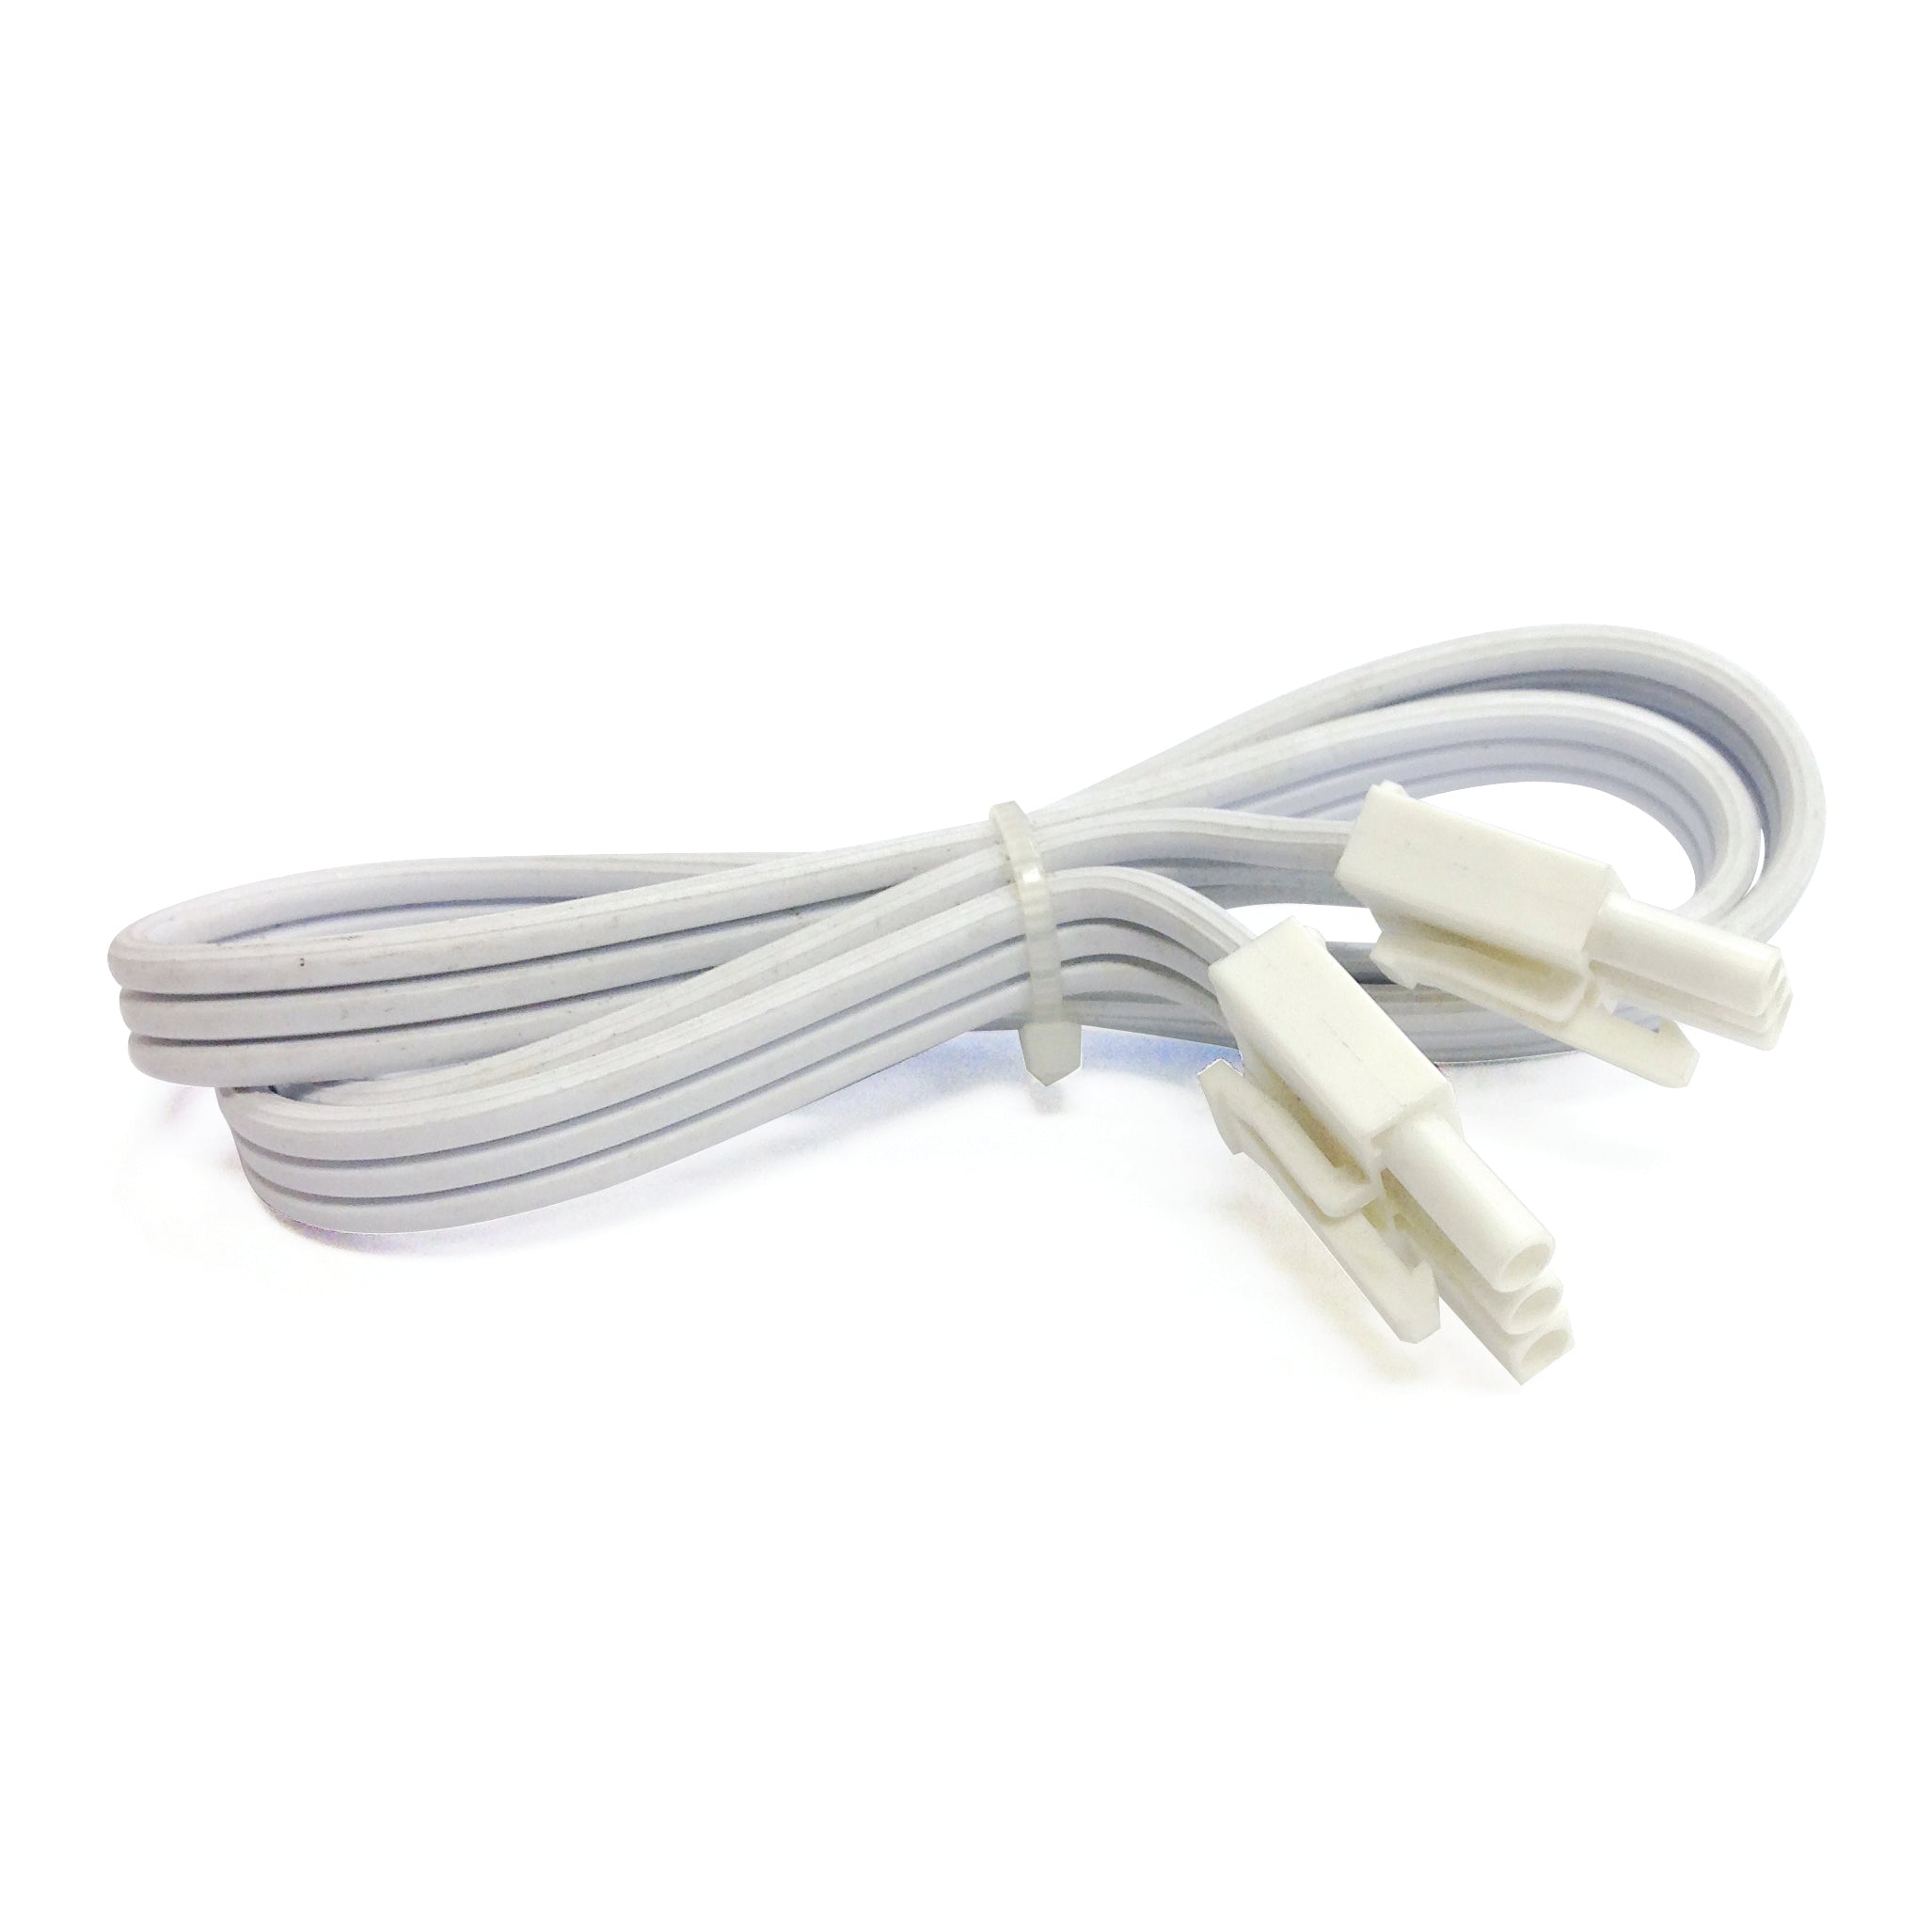 Nora Lighting NUA-812W - Accent / Undercabinet - 12 Inch LEDUR Interconnect Cable, White